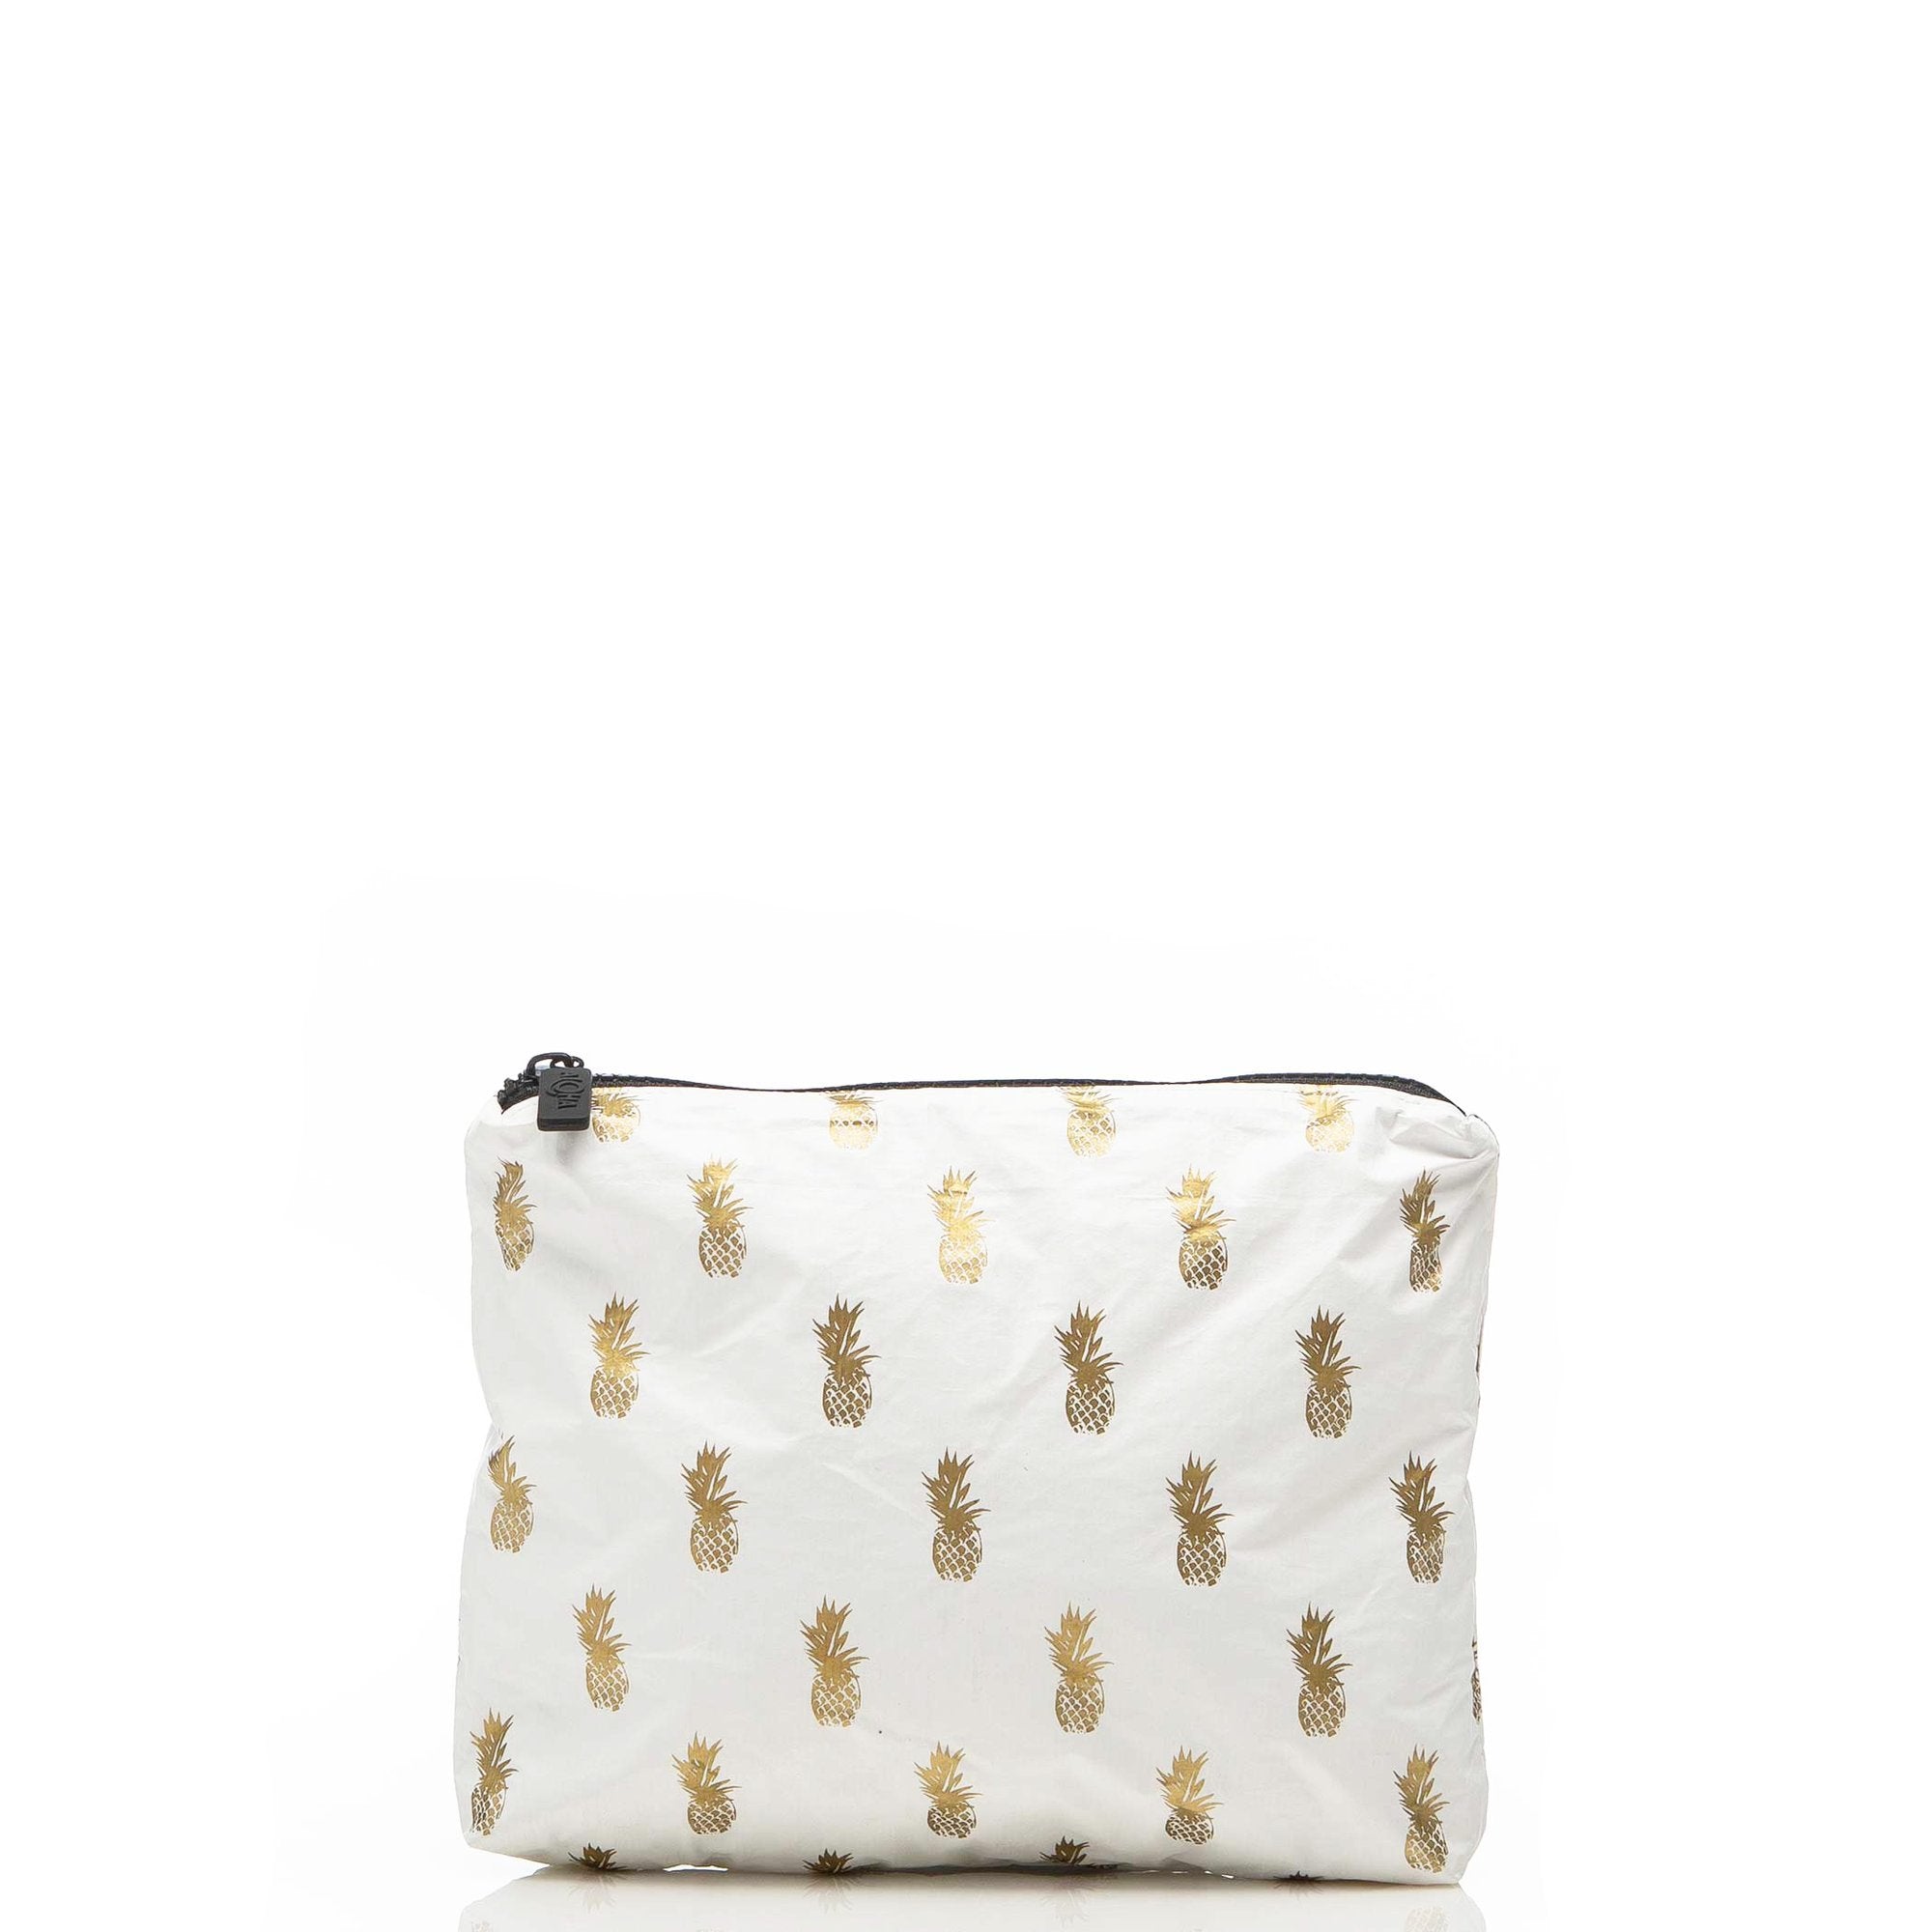 Small White Pineapple Royale Pouch in Gold - The Posh Loft